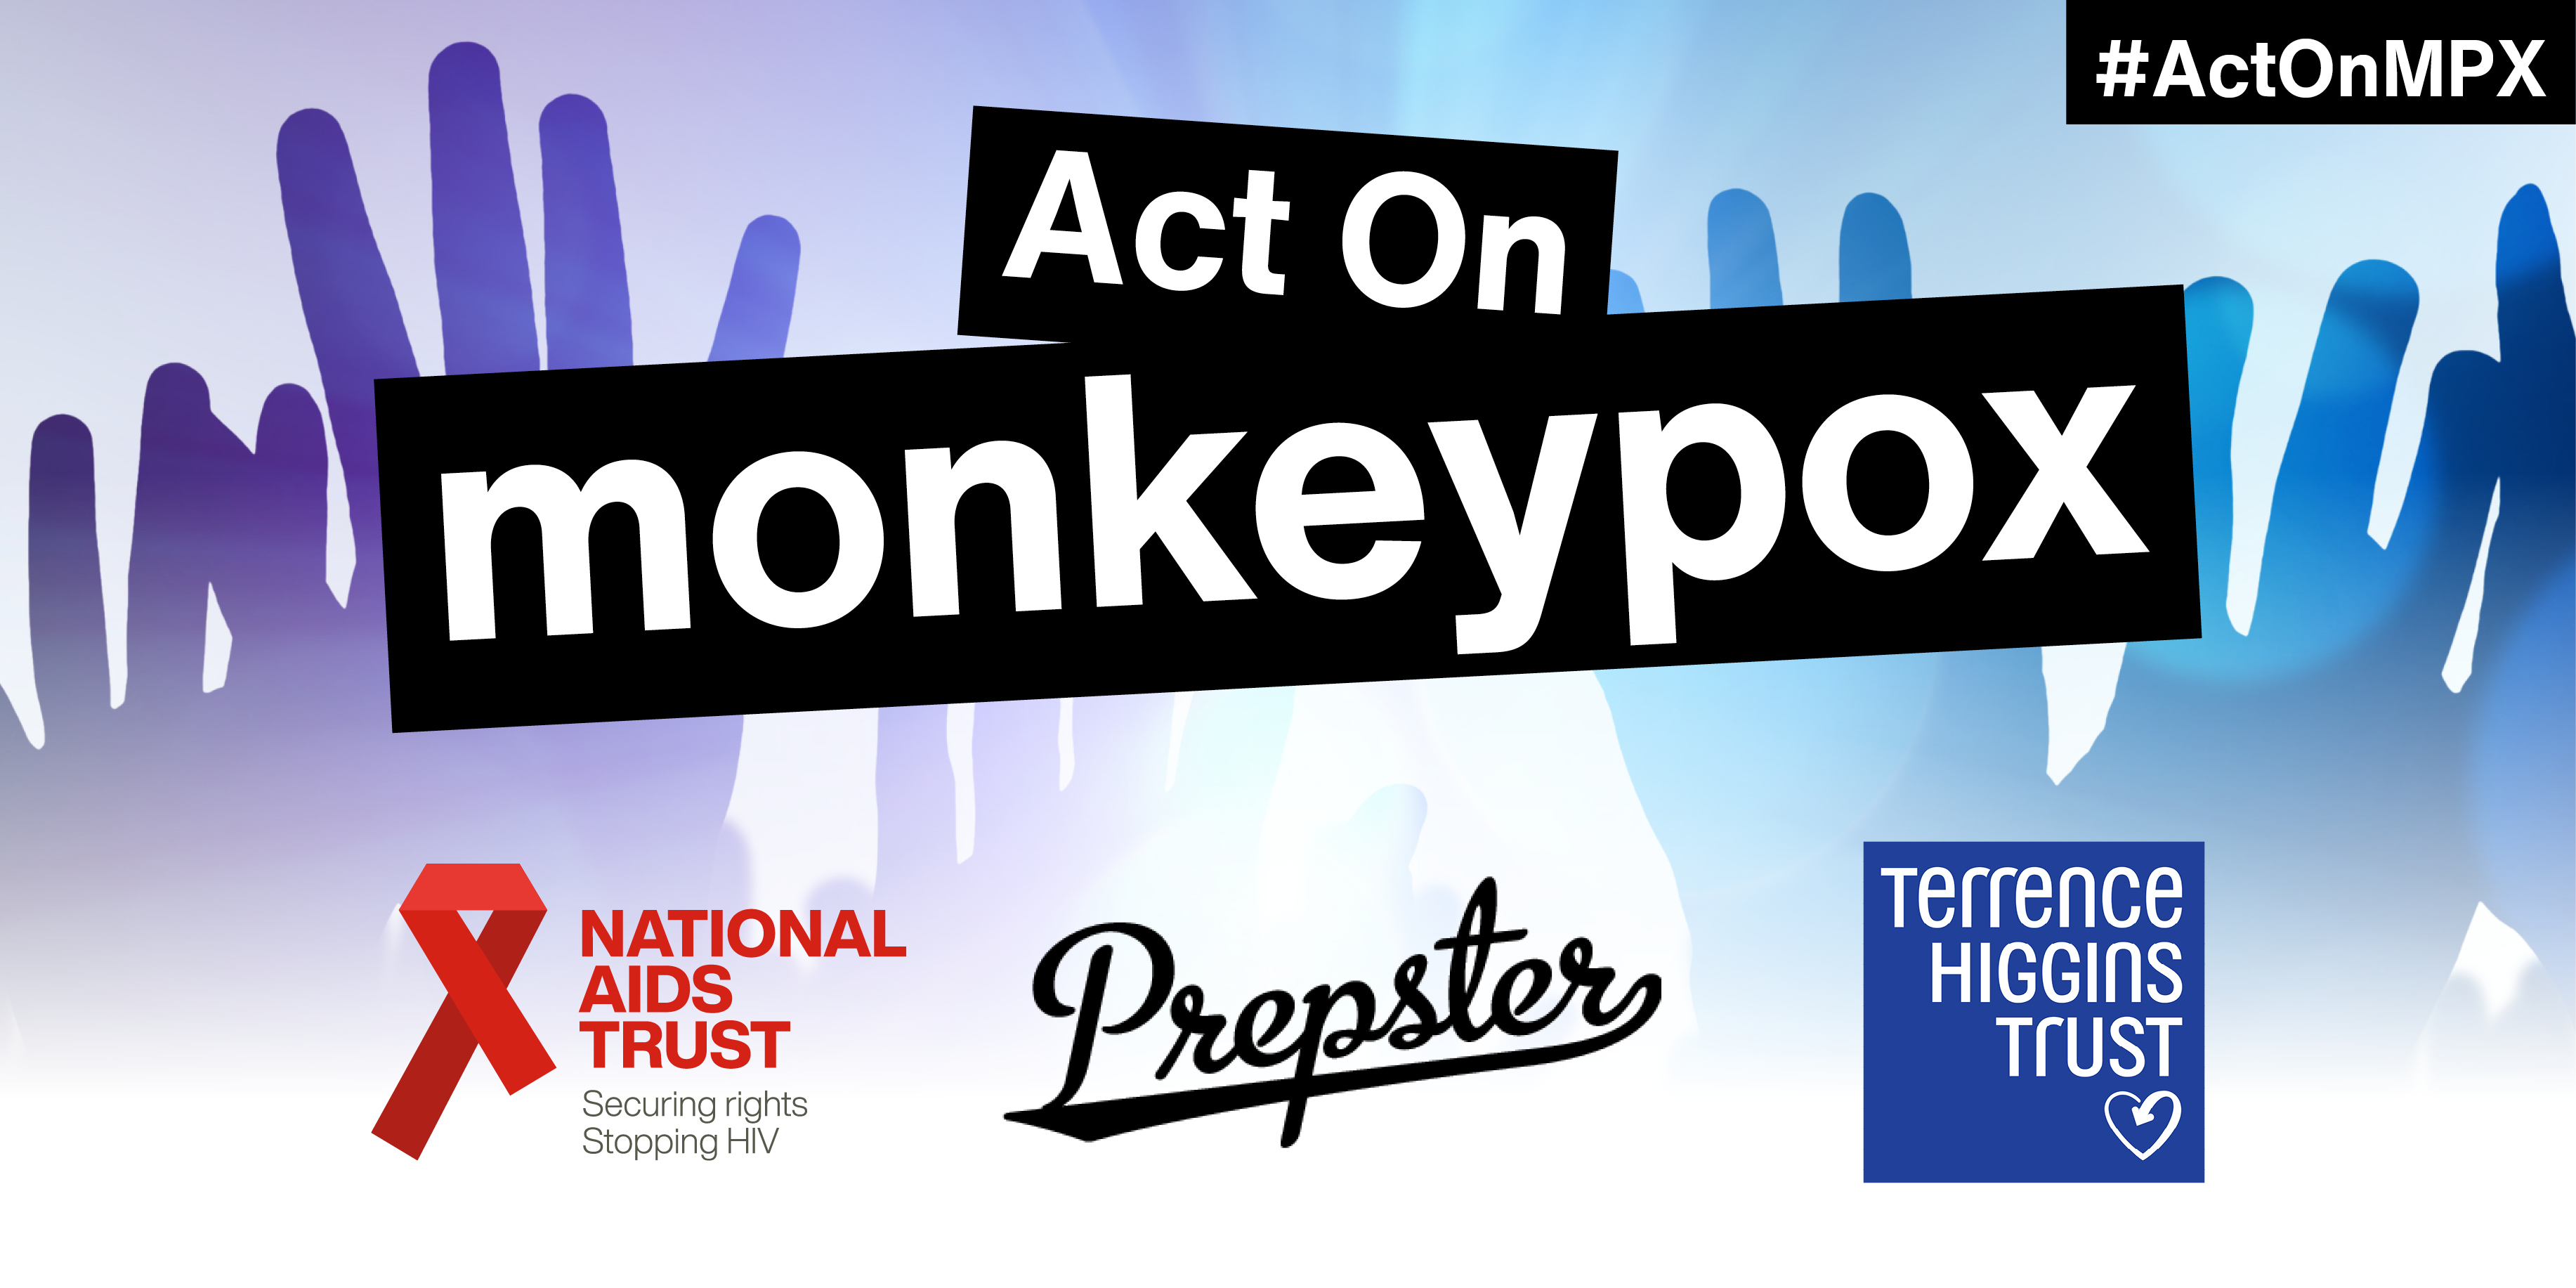 'Act on monkeypox' campaign banner